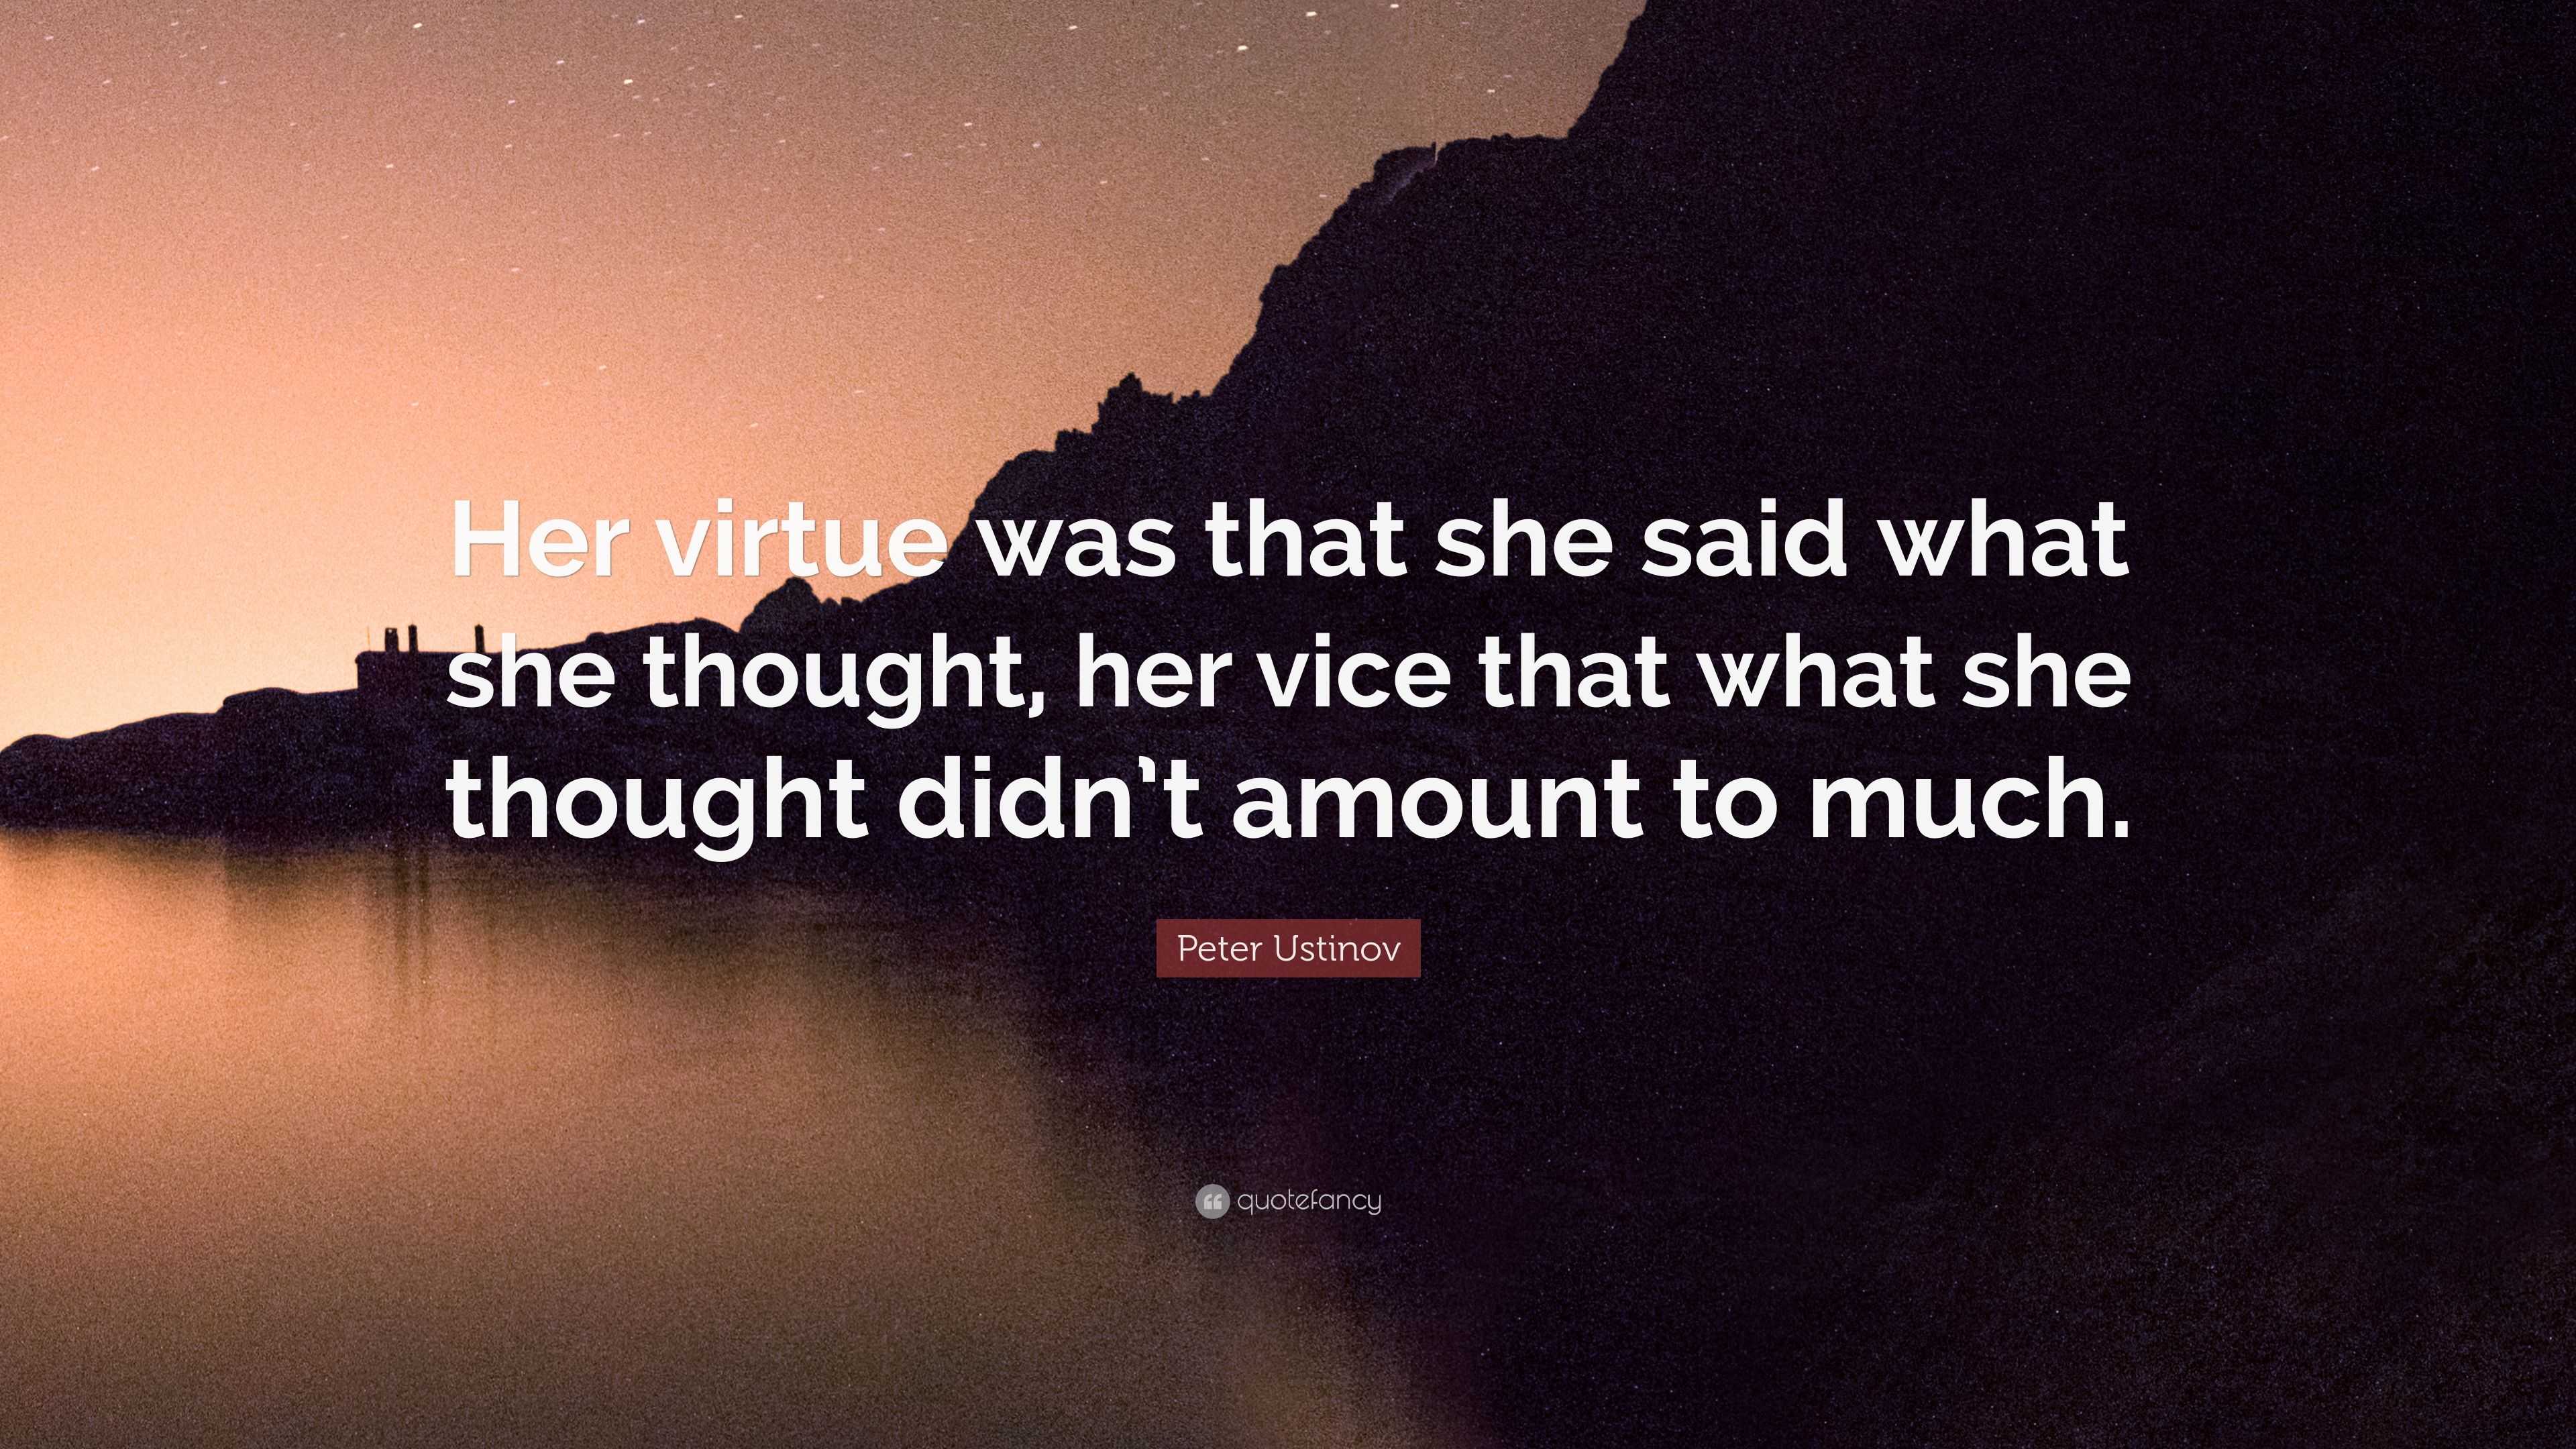 Peter Ustinov Quote: “Her virtue was that she said what she thought ...